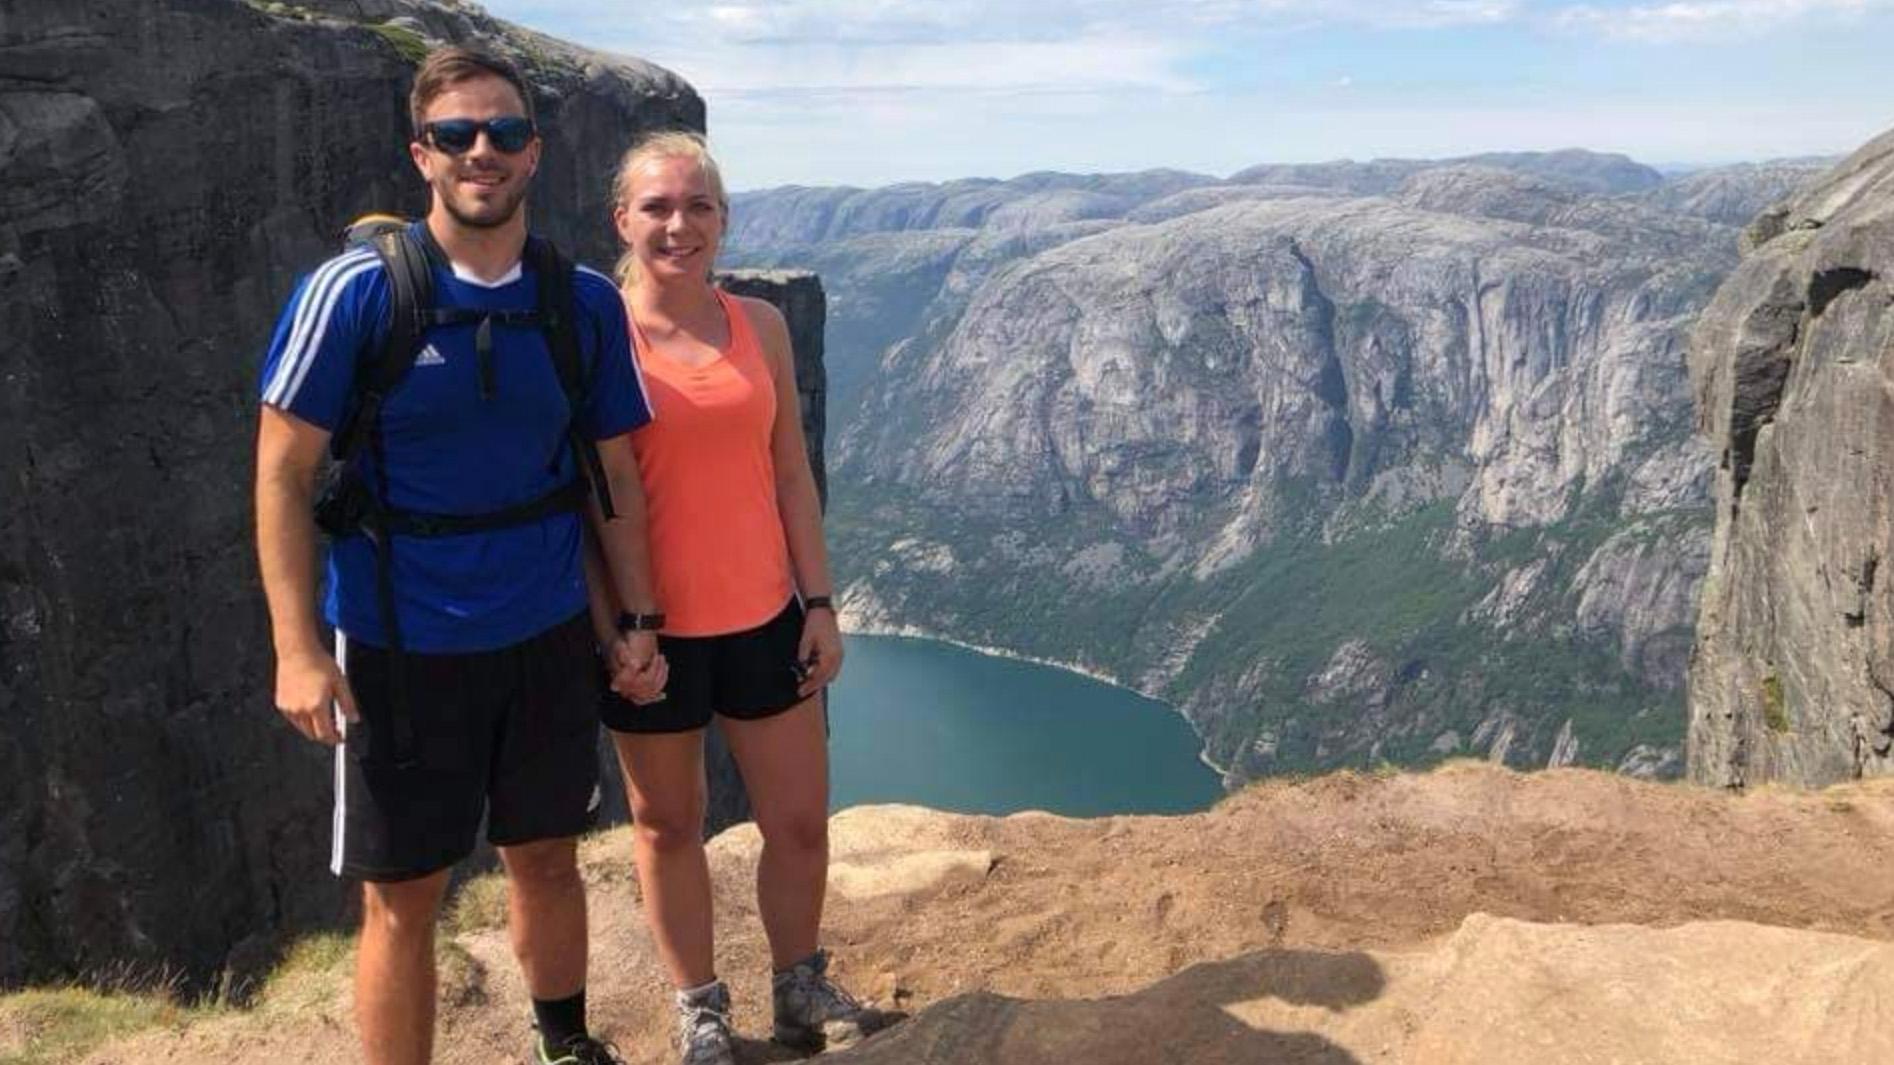 Luke DeBoer, left, and fiancée Ida Marie Rygg on a trip to Kjerag mountain in Norway. Closed borders during the coronavirus pandemic separated them for months.